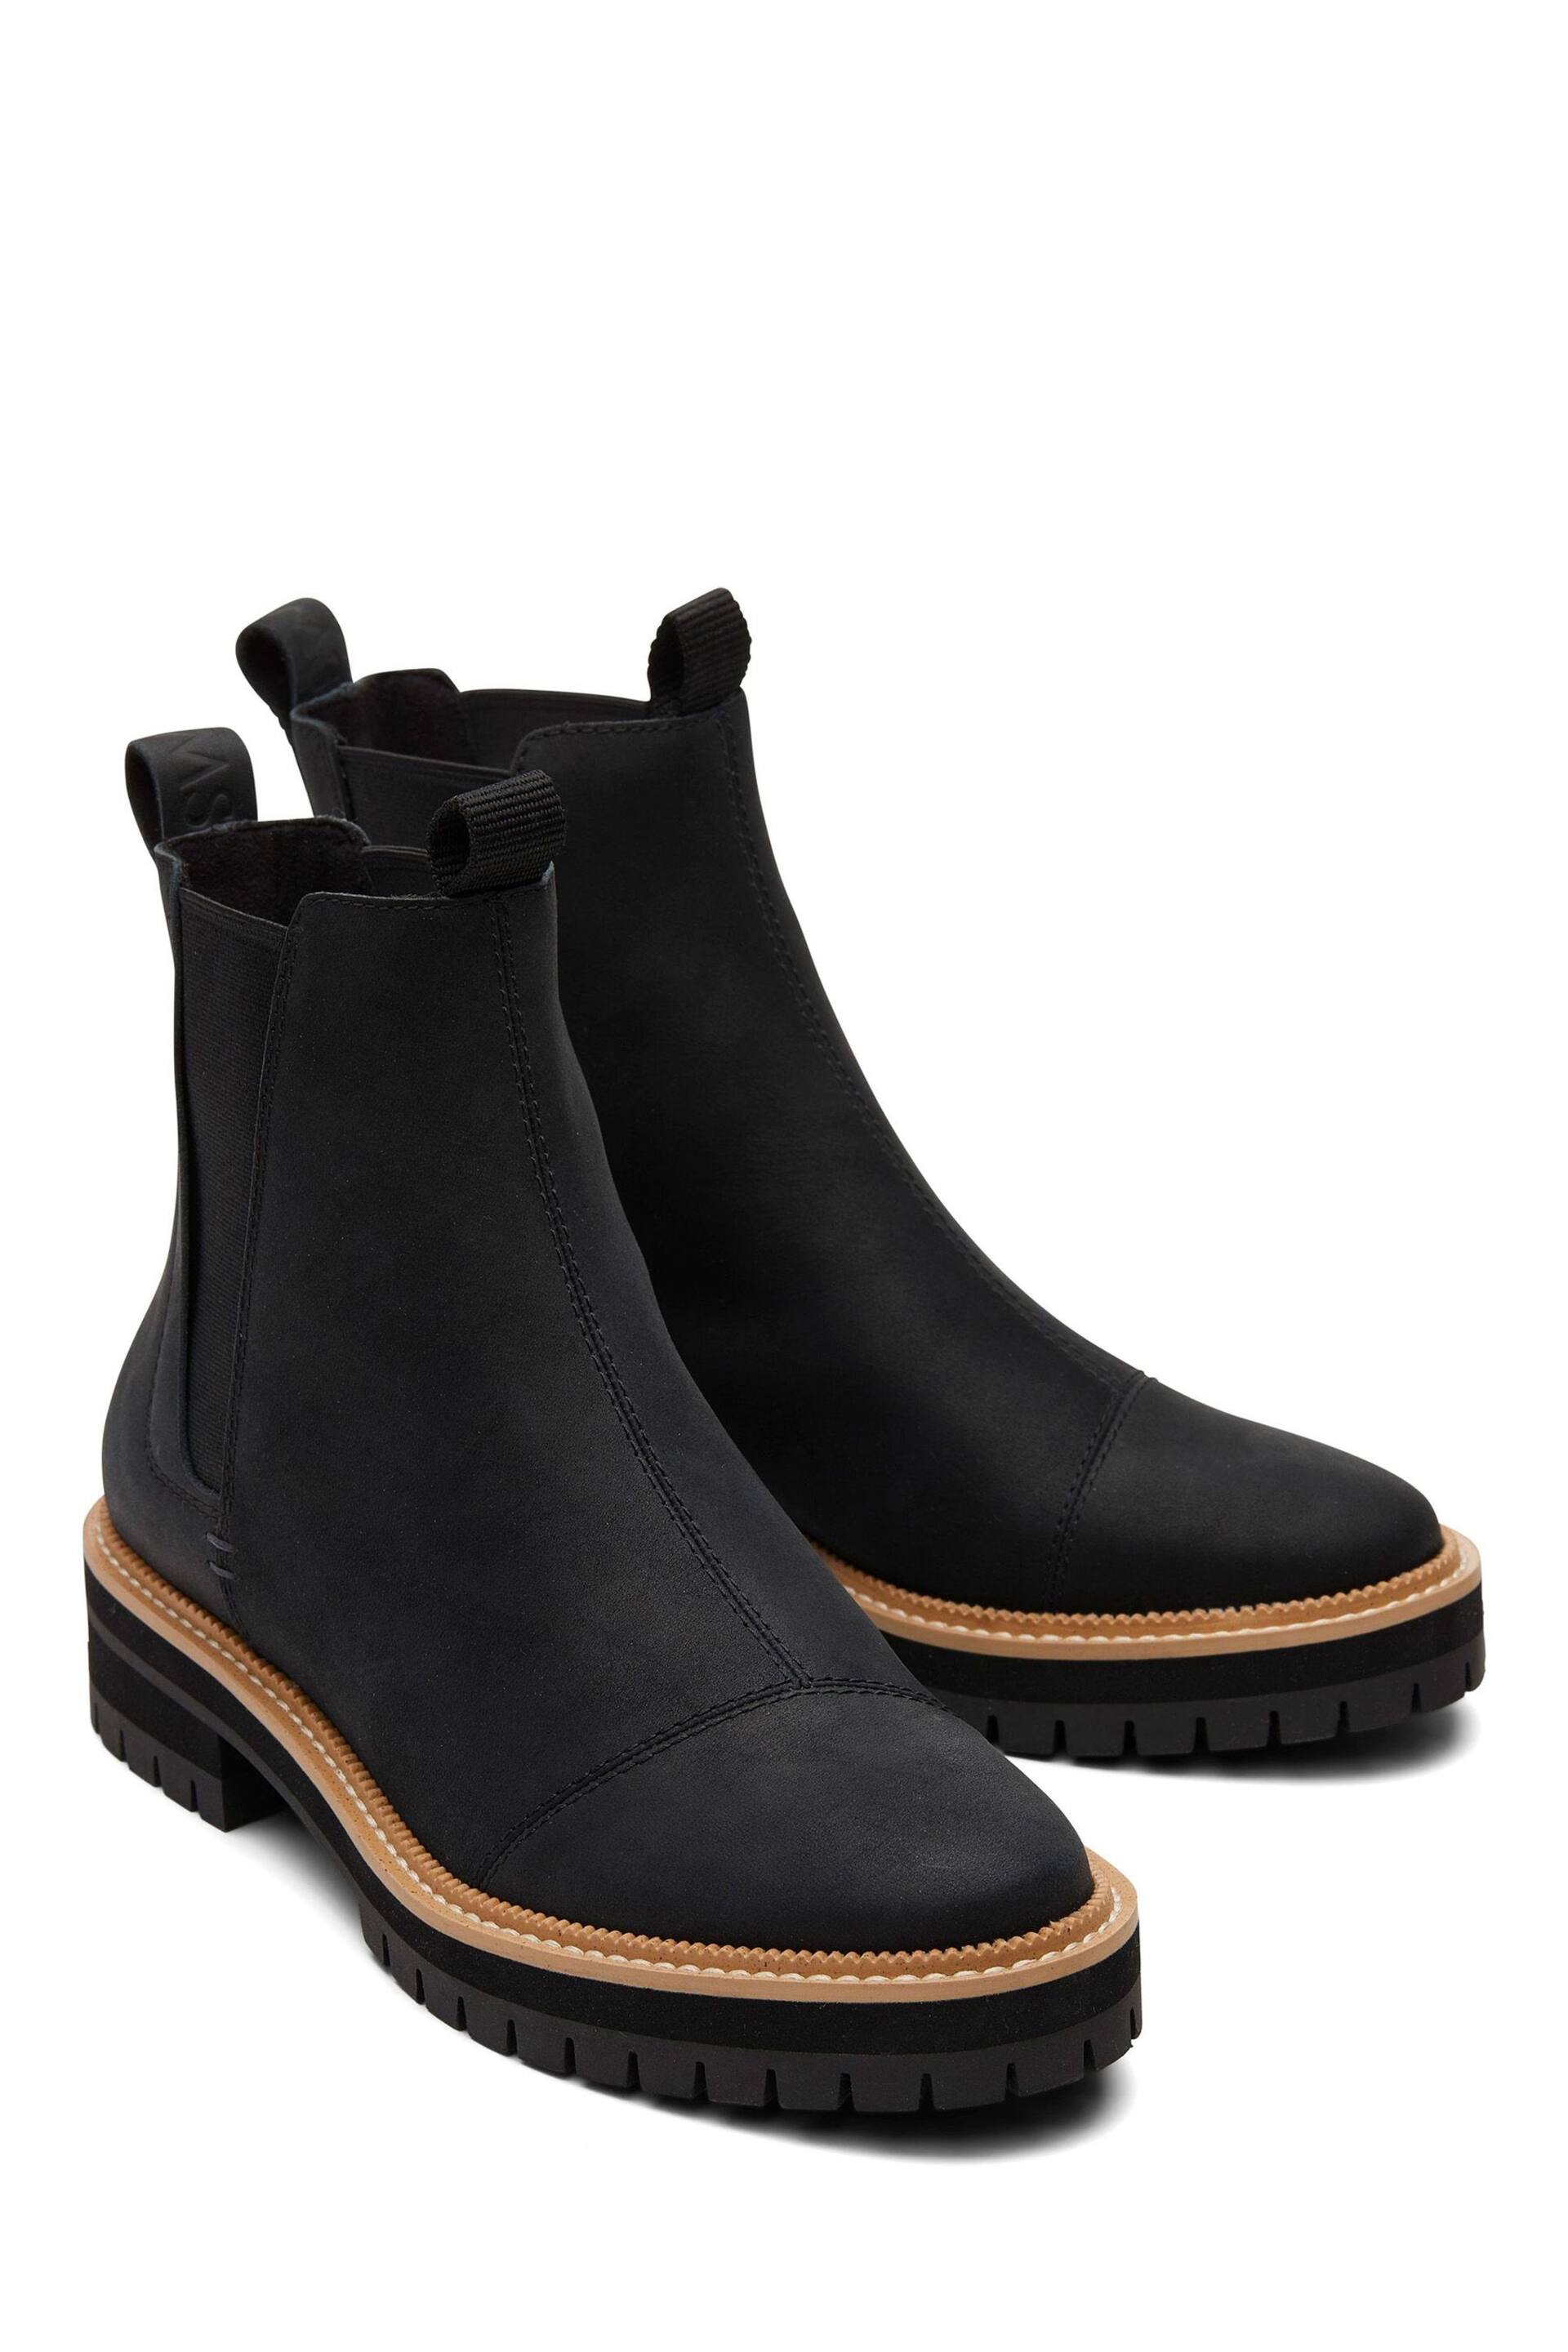 TOMS Dakota Water Resistant Leather with Faux Fur Boots - Image 4 of 7